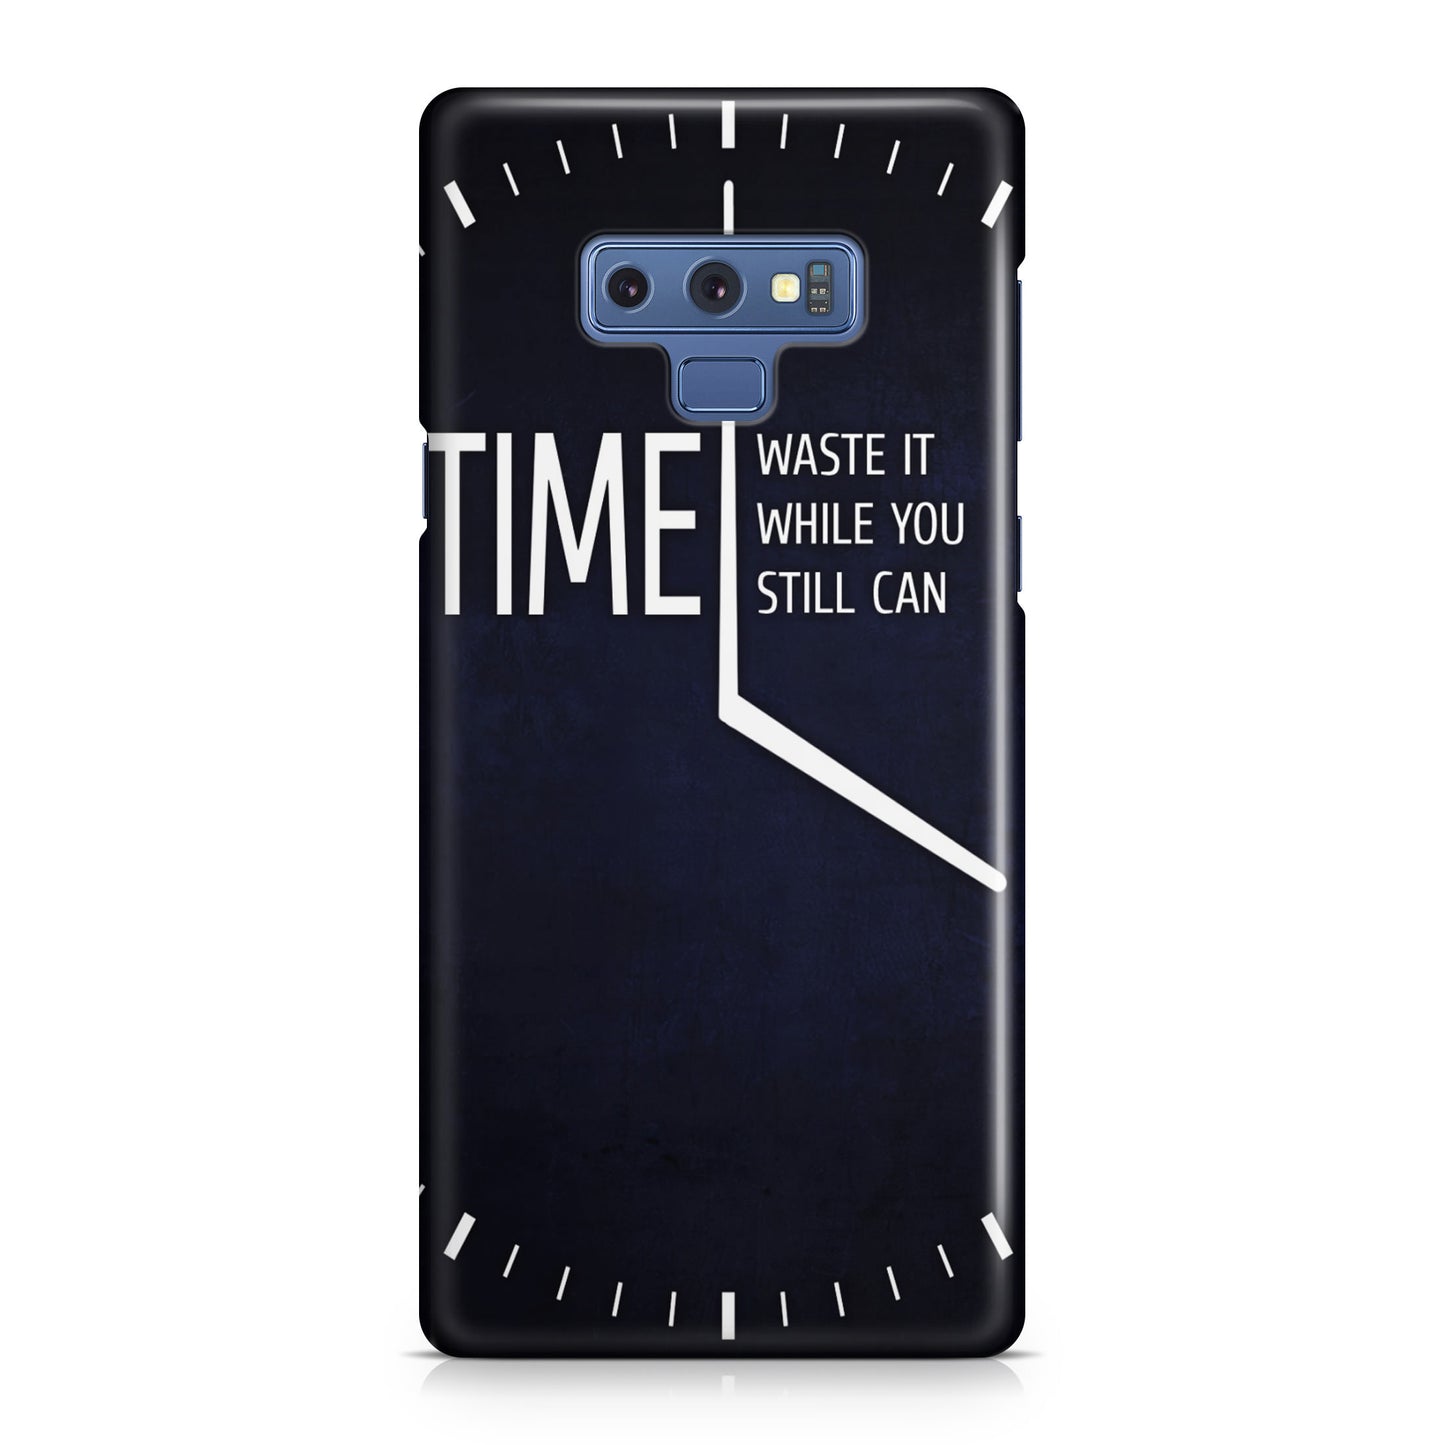 Time Waste It While You Still Can Galaxy Note 9 Case